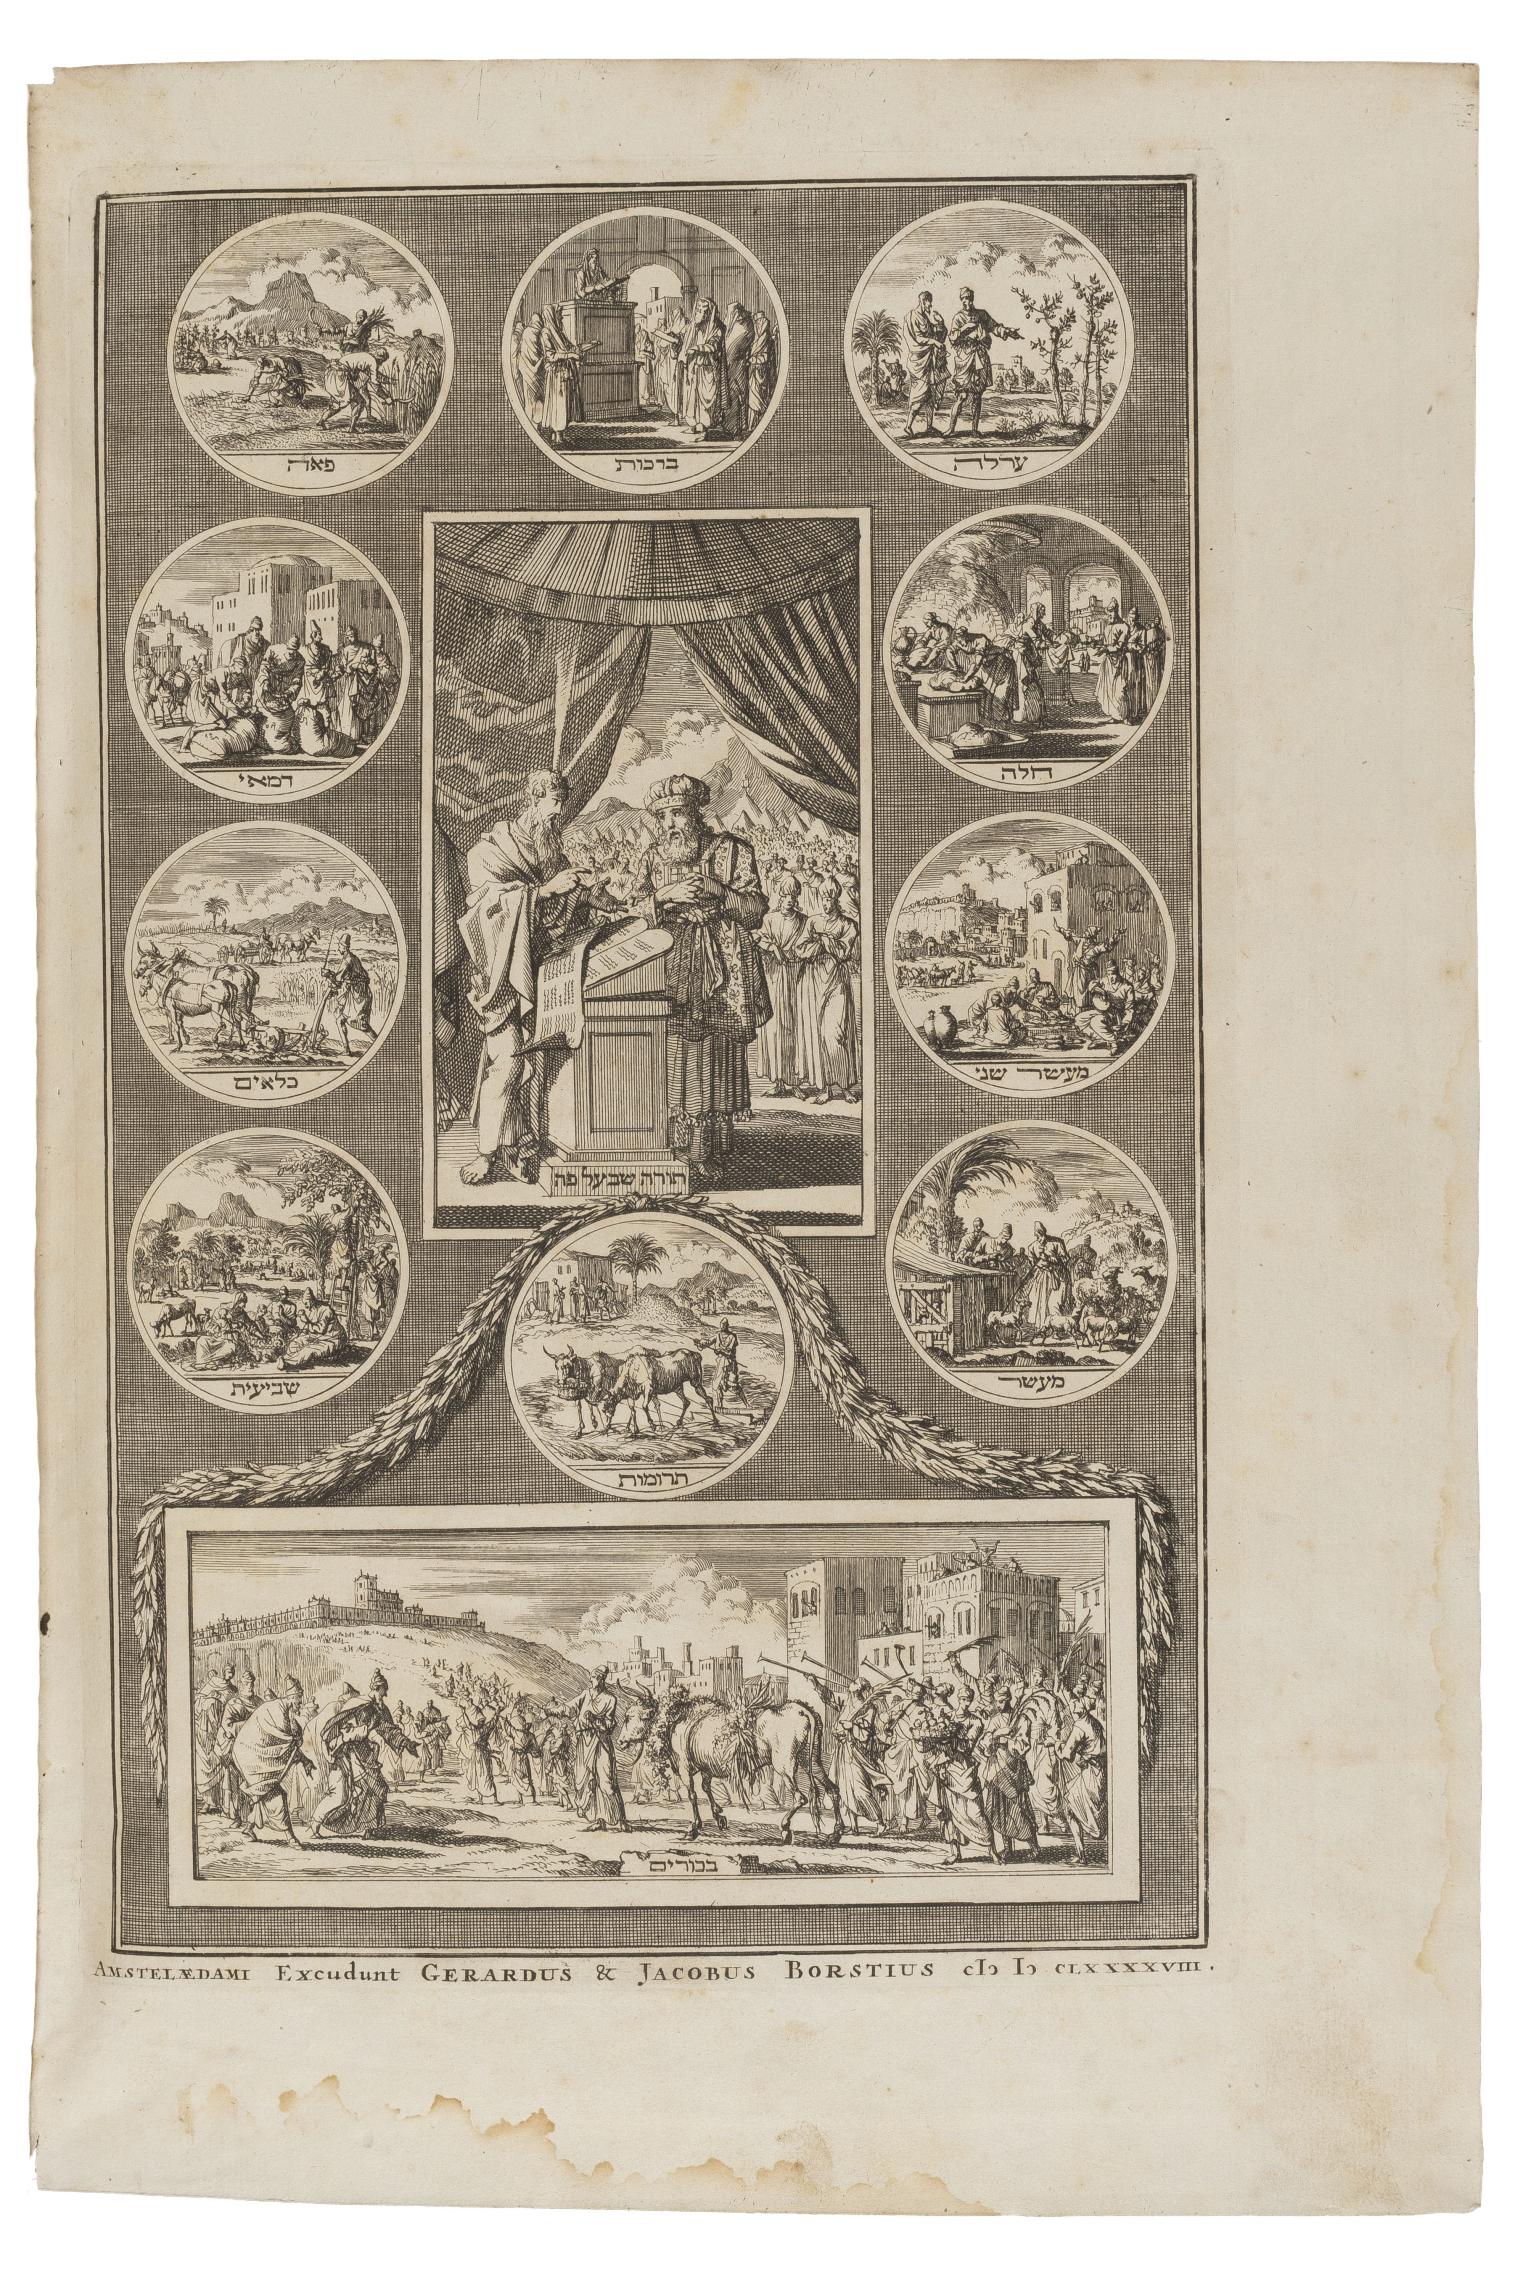 Print with central rectangular scene of men at podium surrounded by ten circles with images of figures and animals, and scene at bottom of large crowd outside city. 